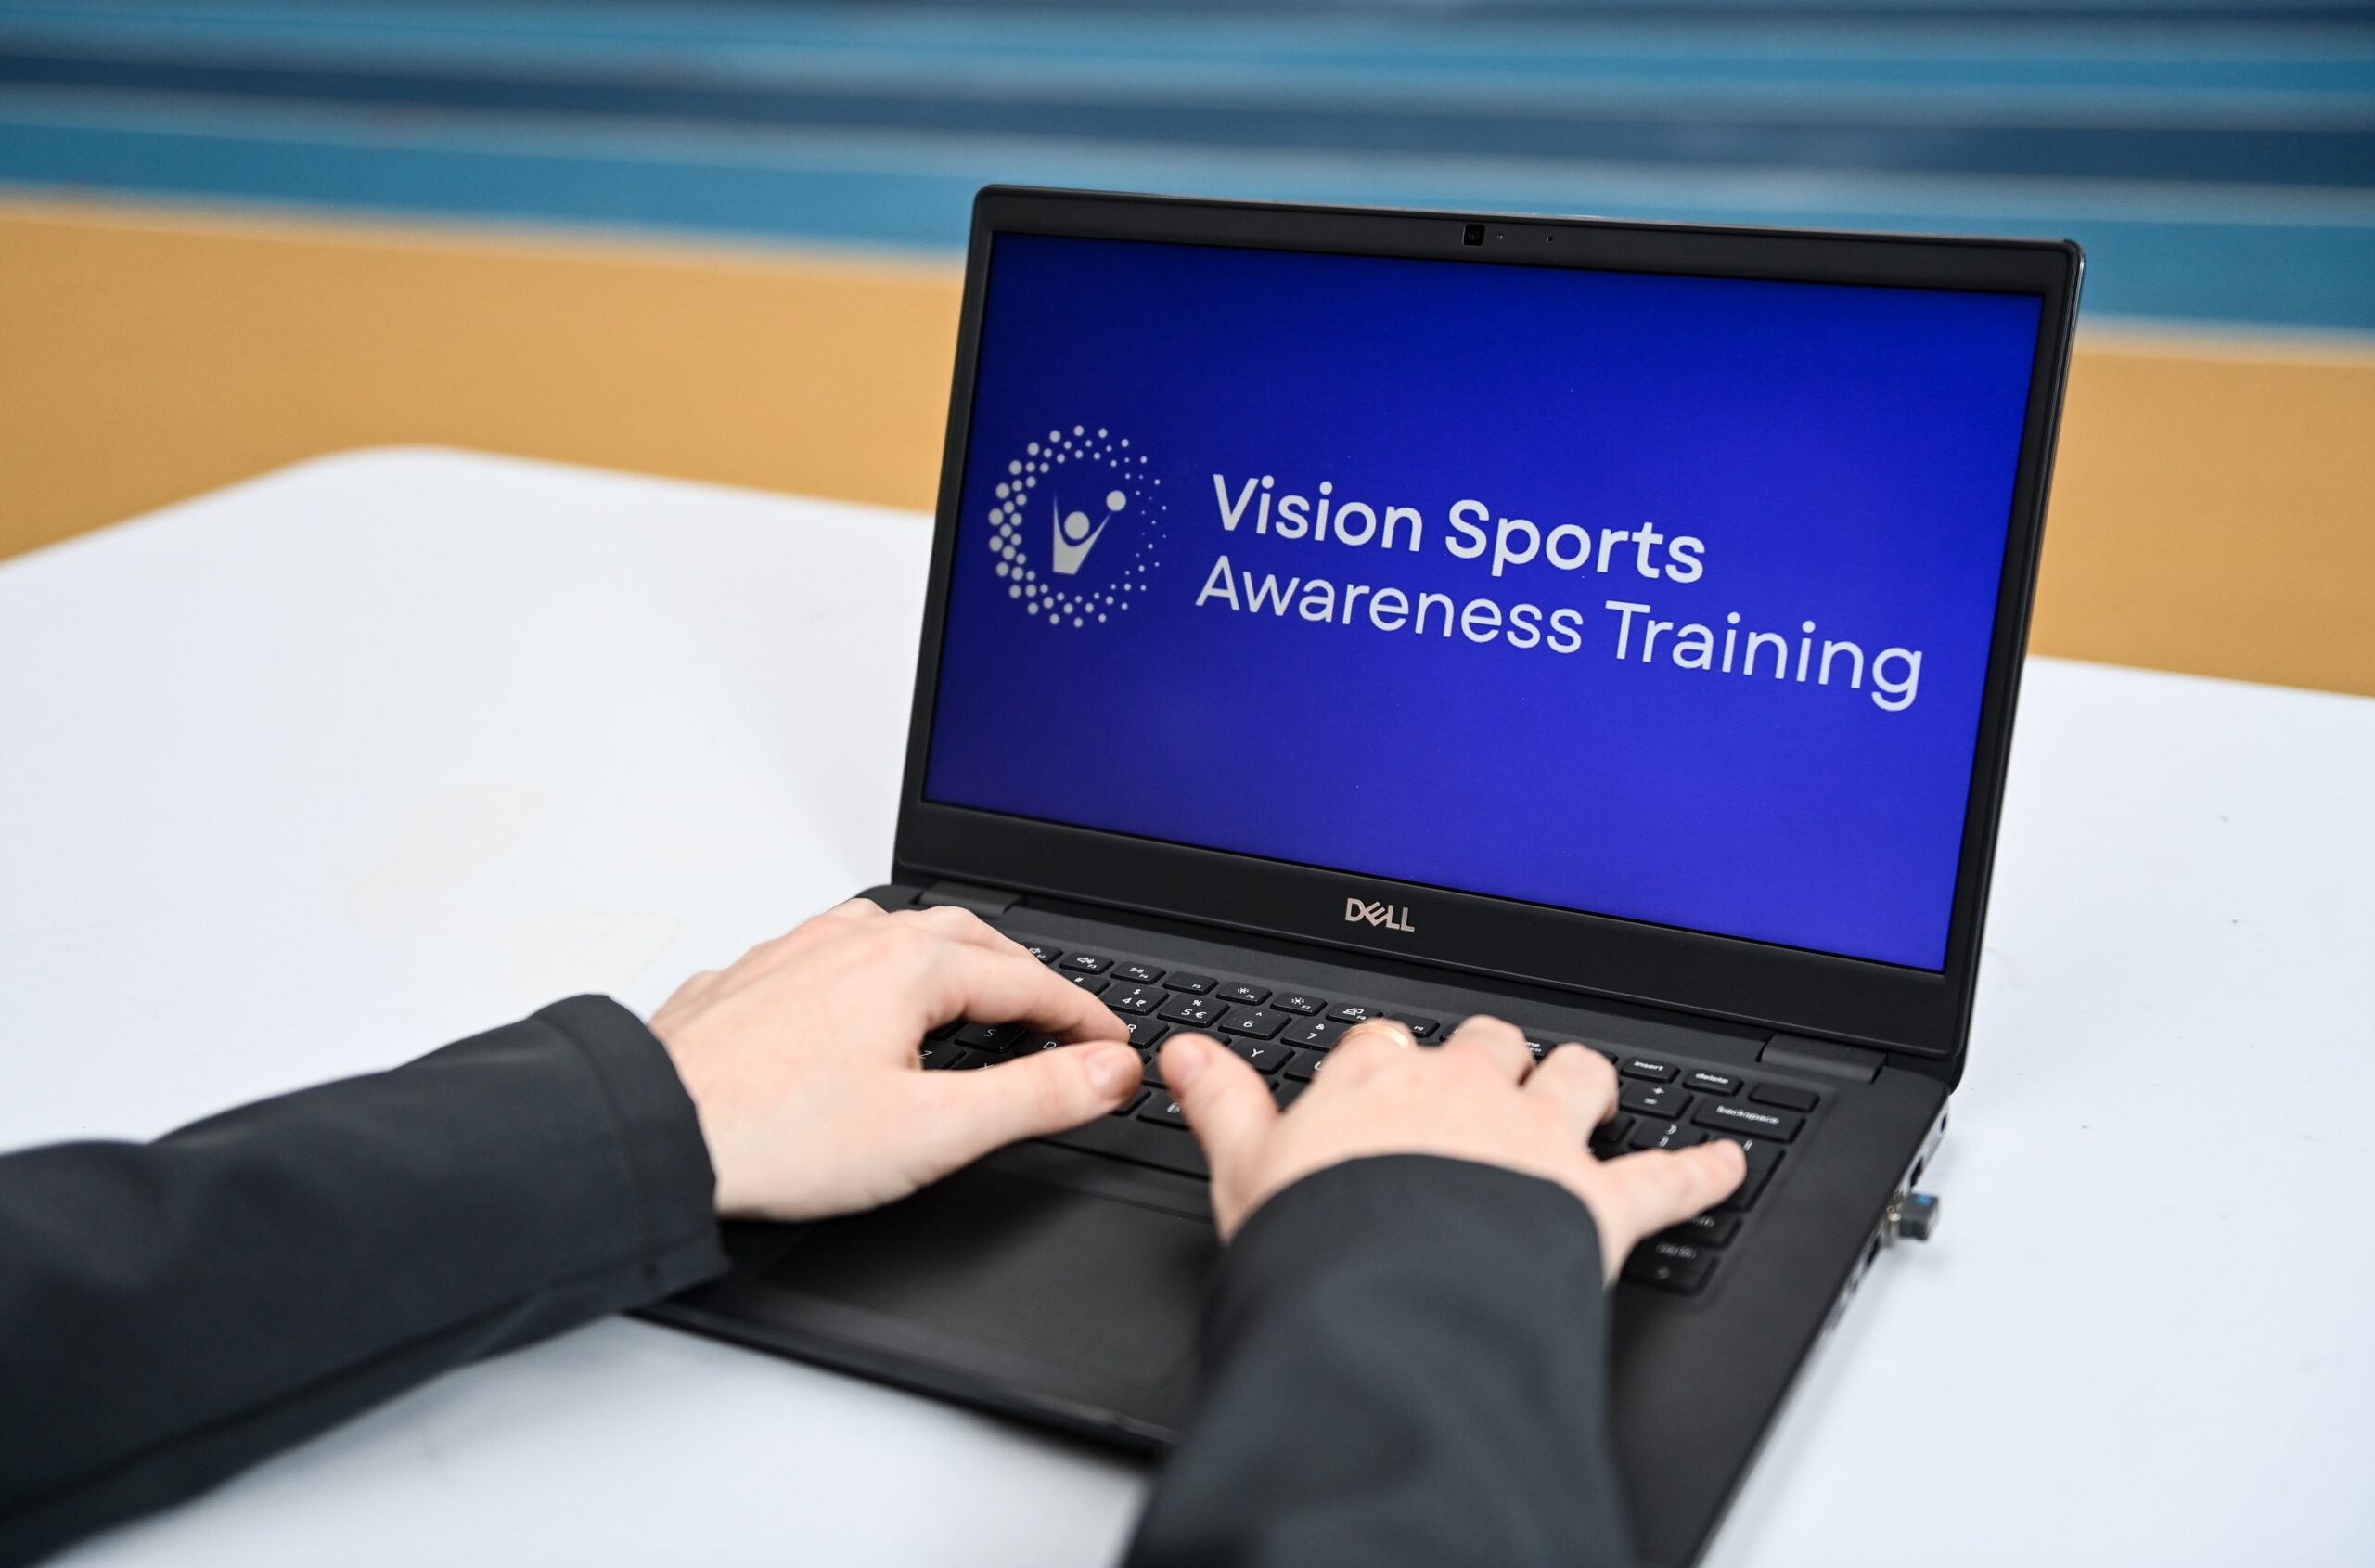 A person's hands typing on a laptop keyboard. The screen of the laptop has a blue background with the words Vision Sports Awareness Training written in white font